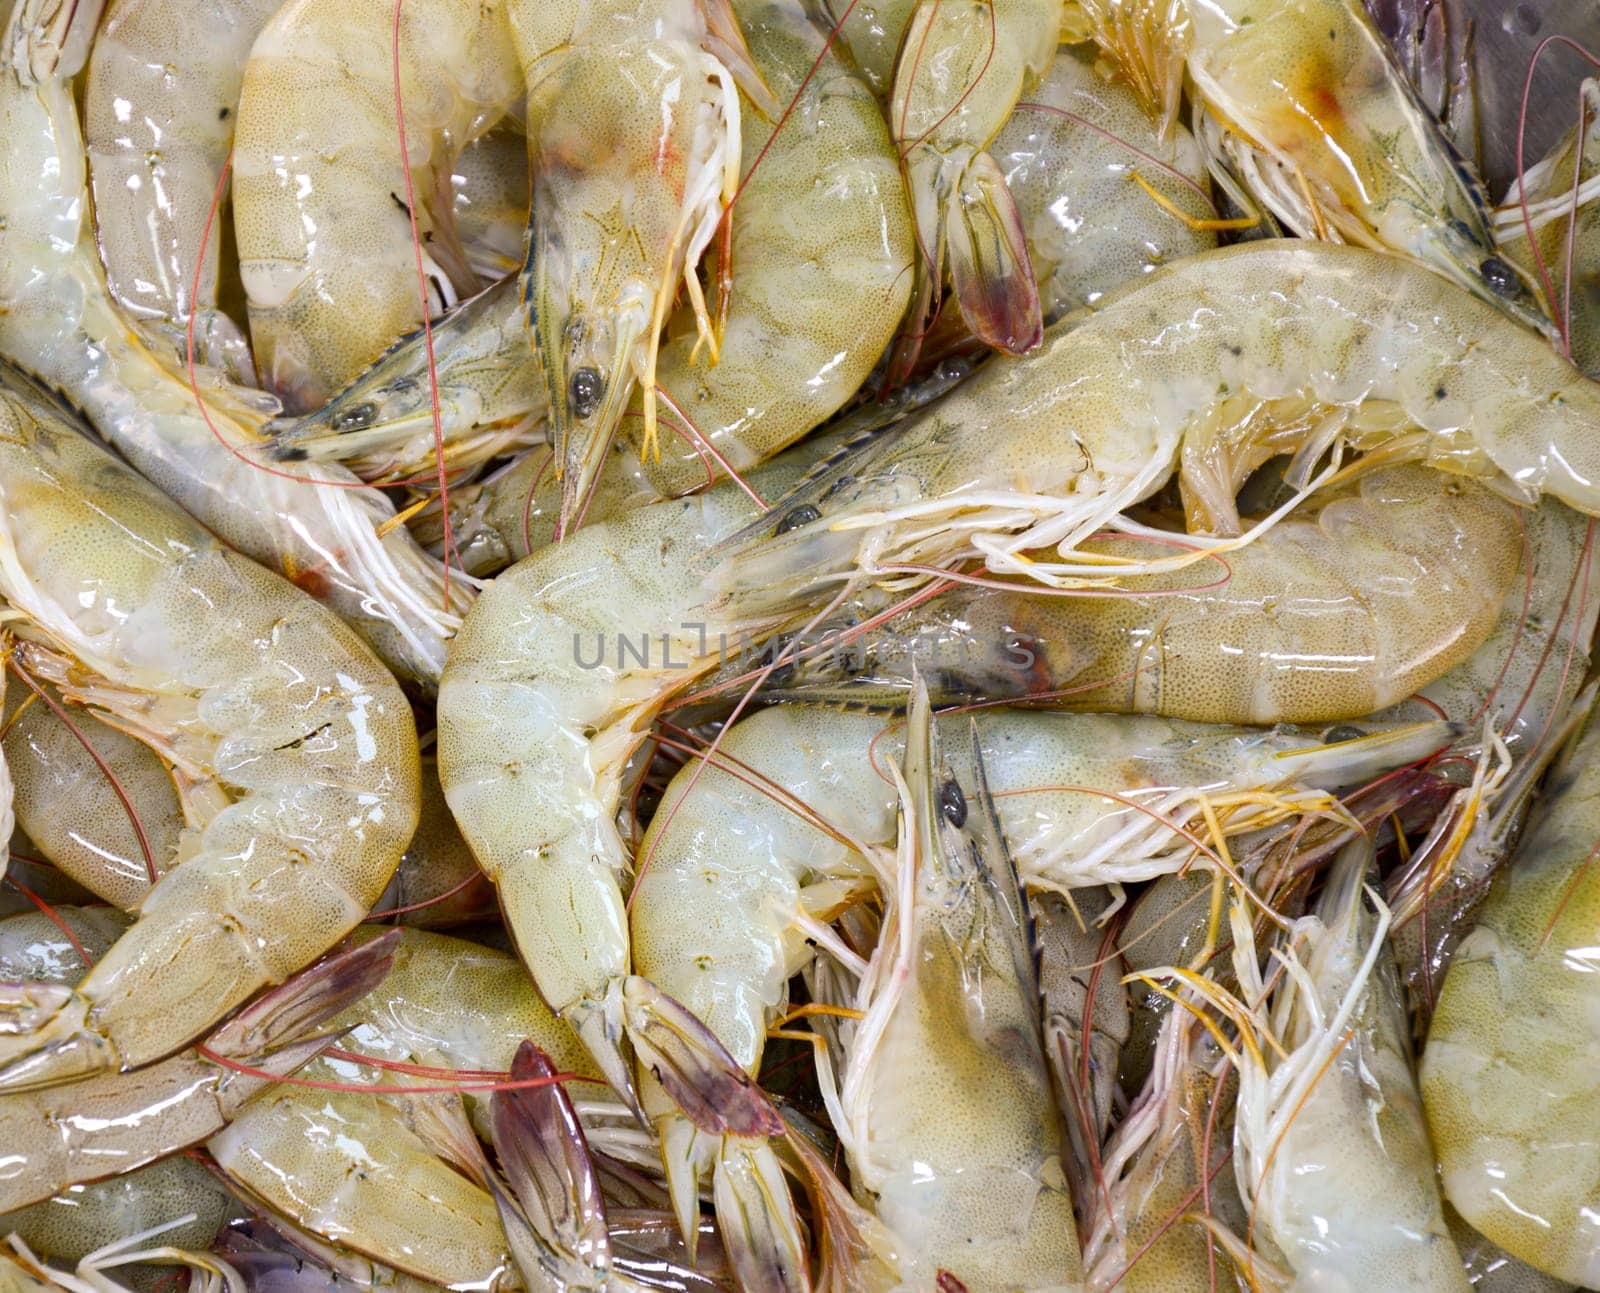 fresh shrimp, seafood It is an economic animal that is widely popular. All countries consume